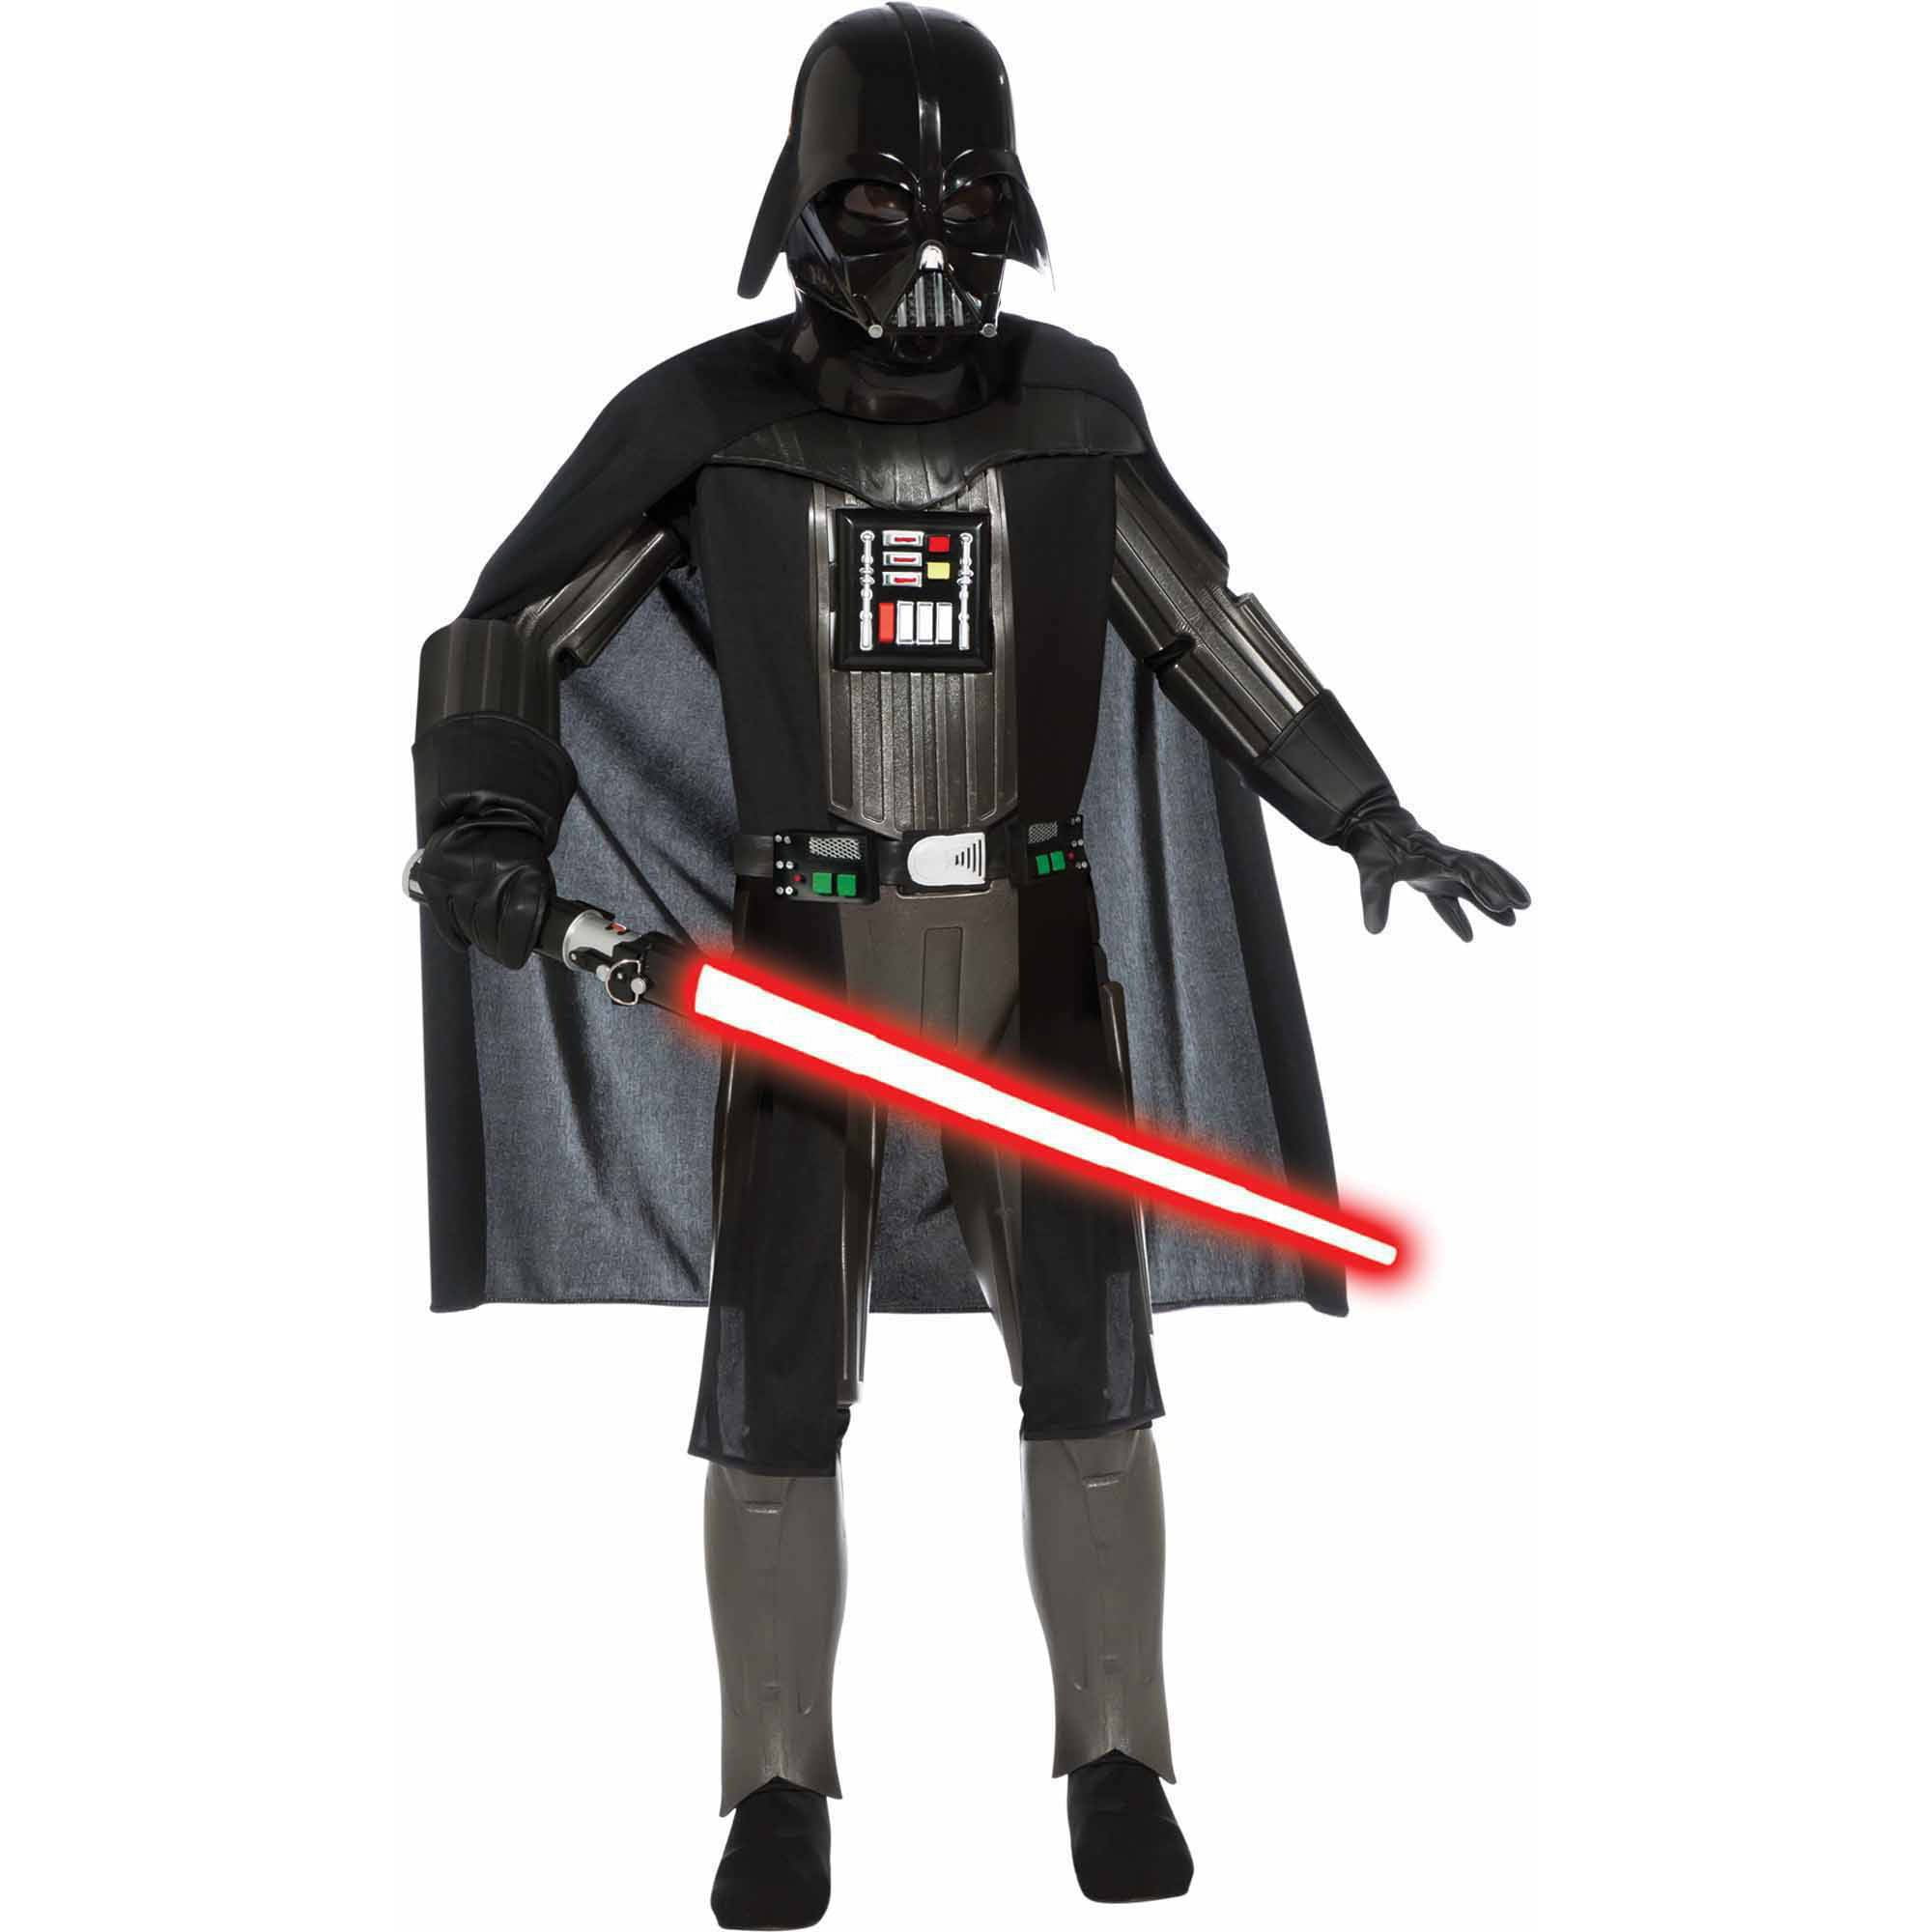 STAR WARS Darth Vader Fancy Dress Costume With Cape & Mask 9-10 years Halloween 